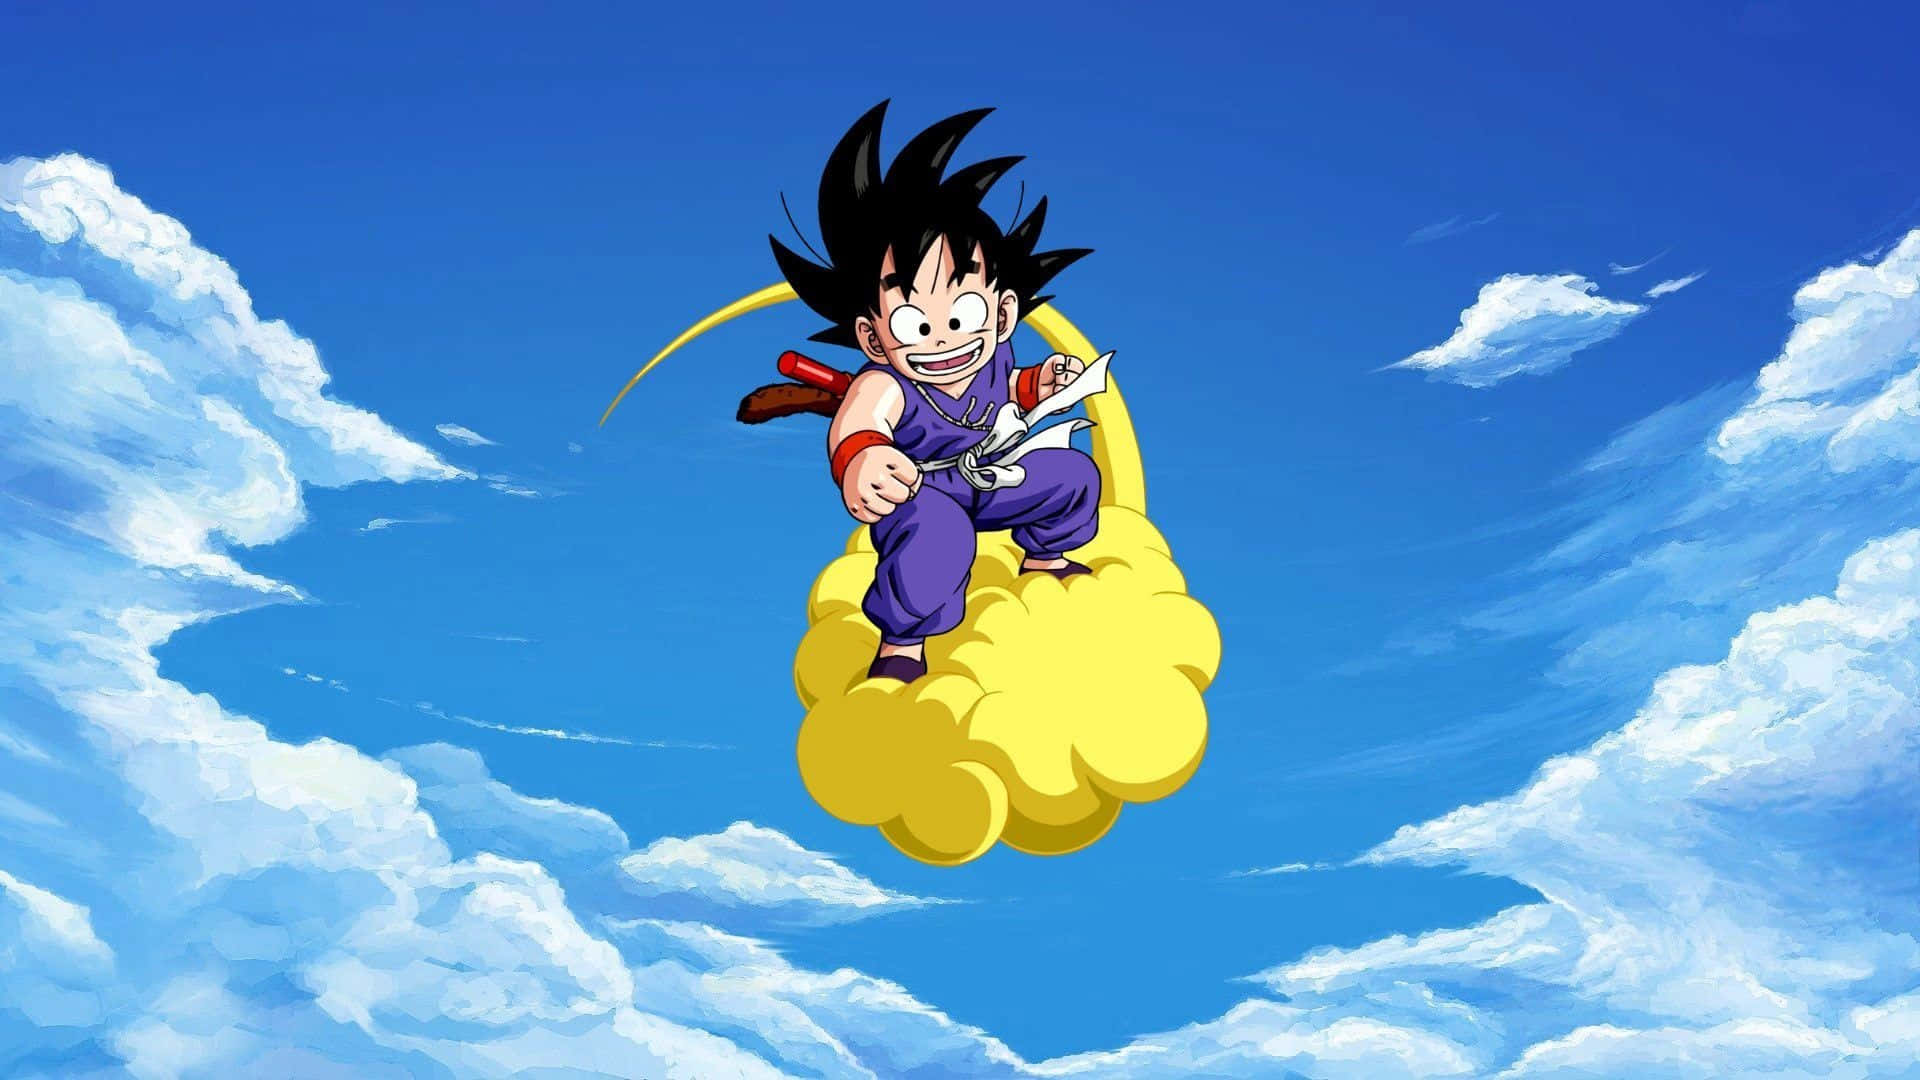 A young Goku beginning the journey of martial arts mastery. Wallpaper